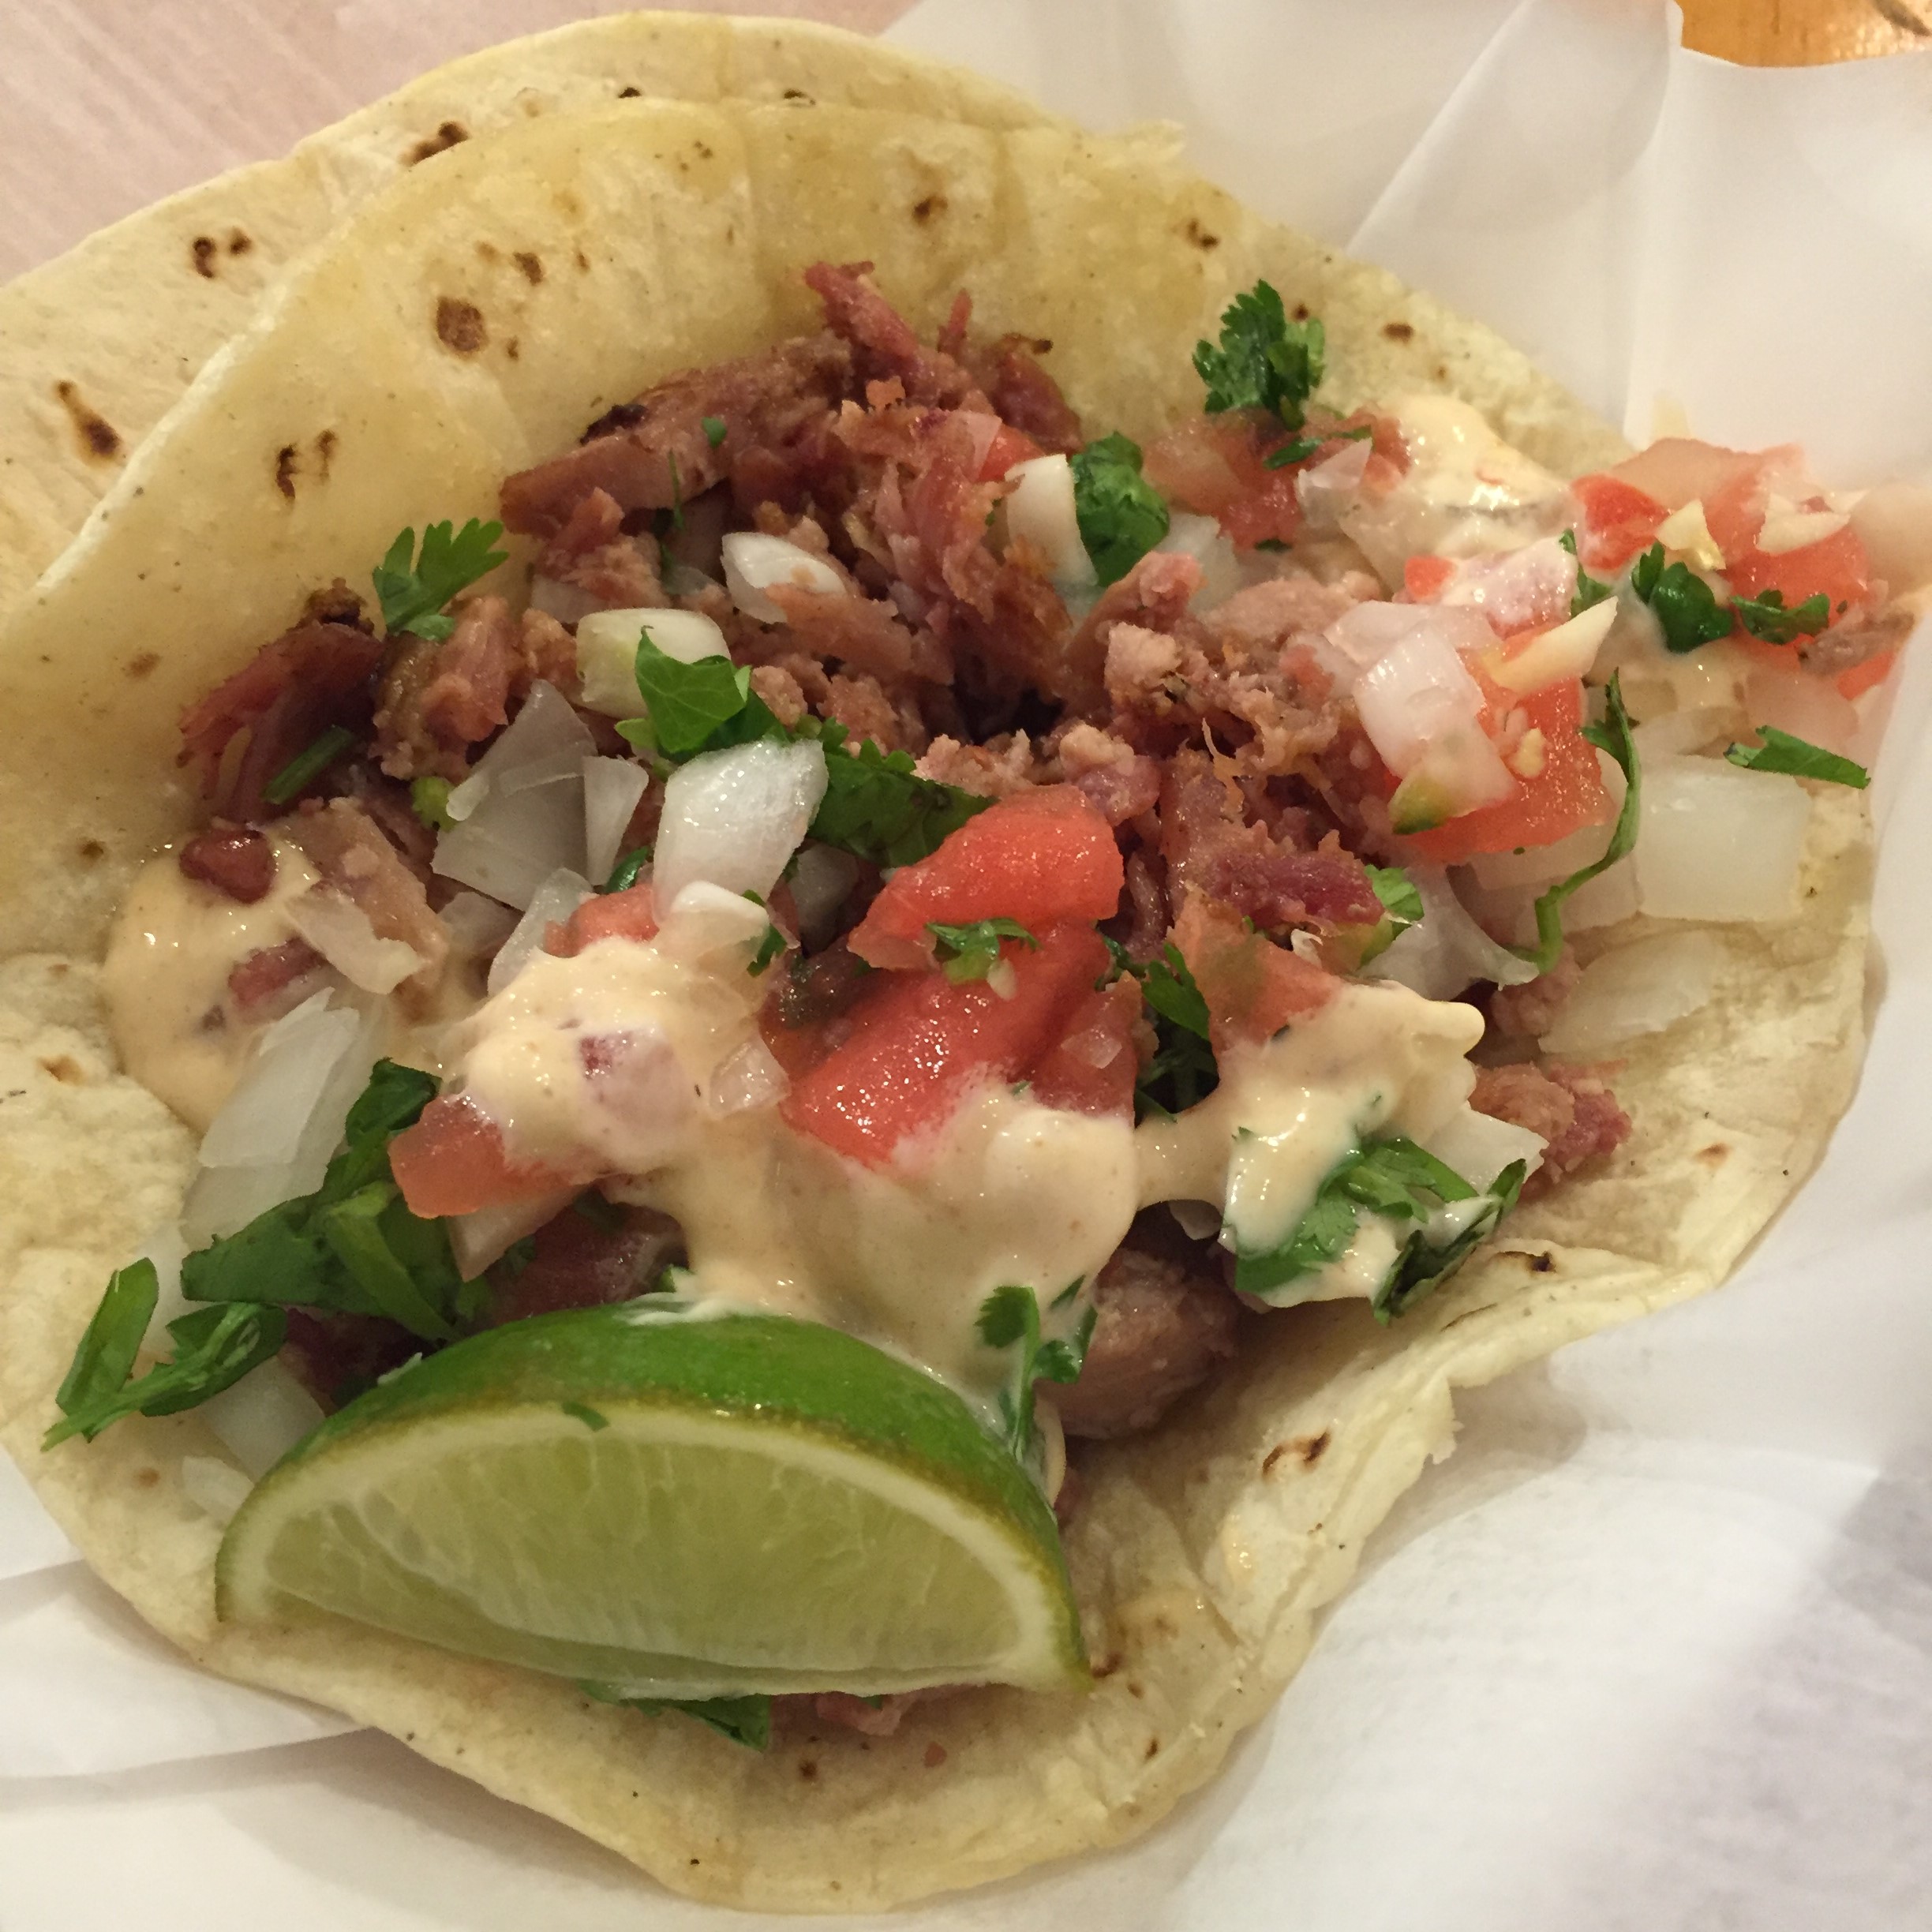 The taco was really good as well and had a watermelon pico de gallo.